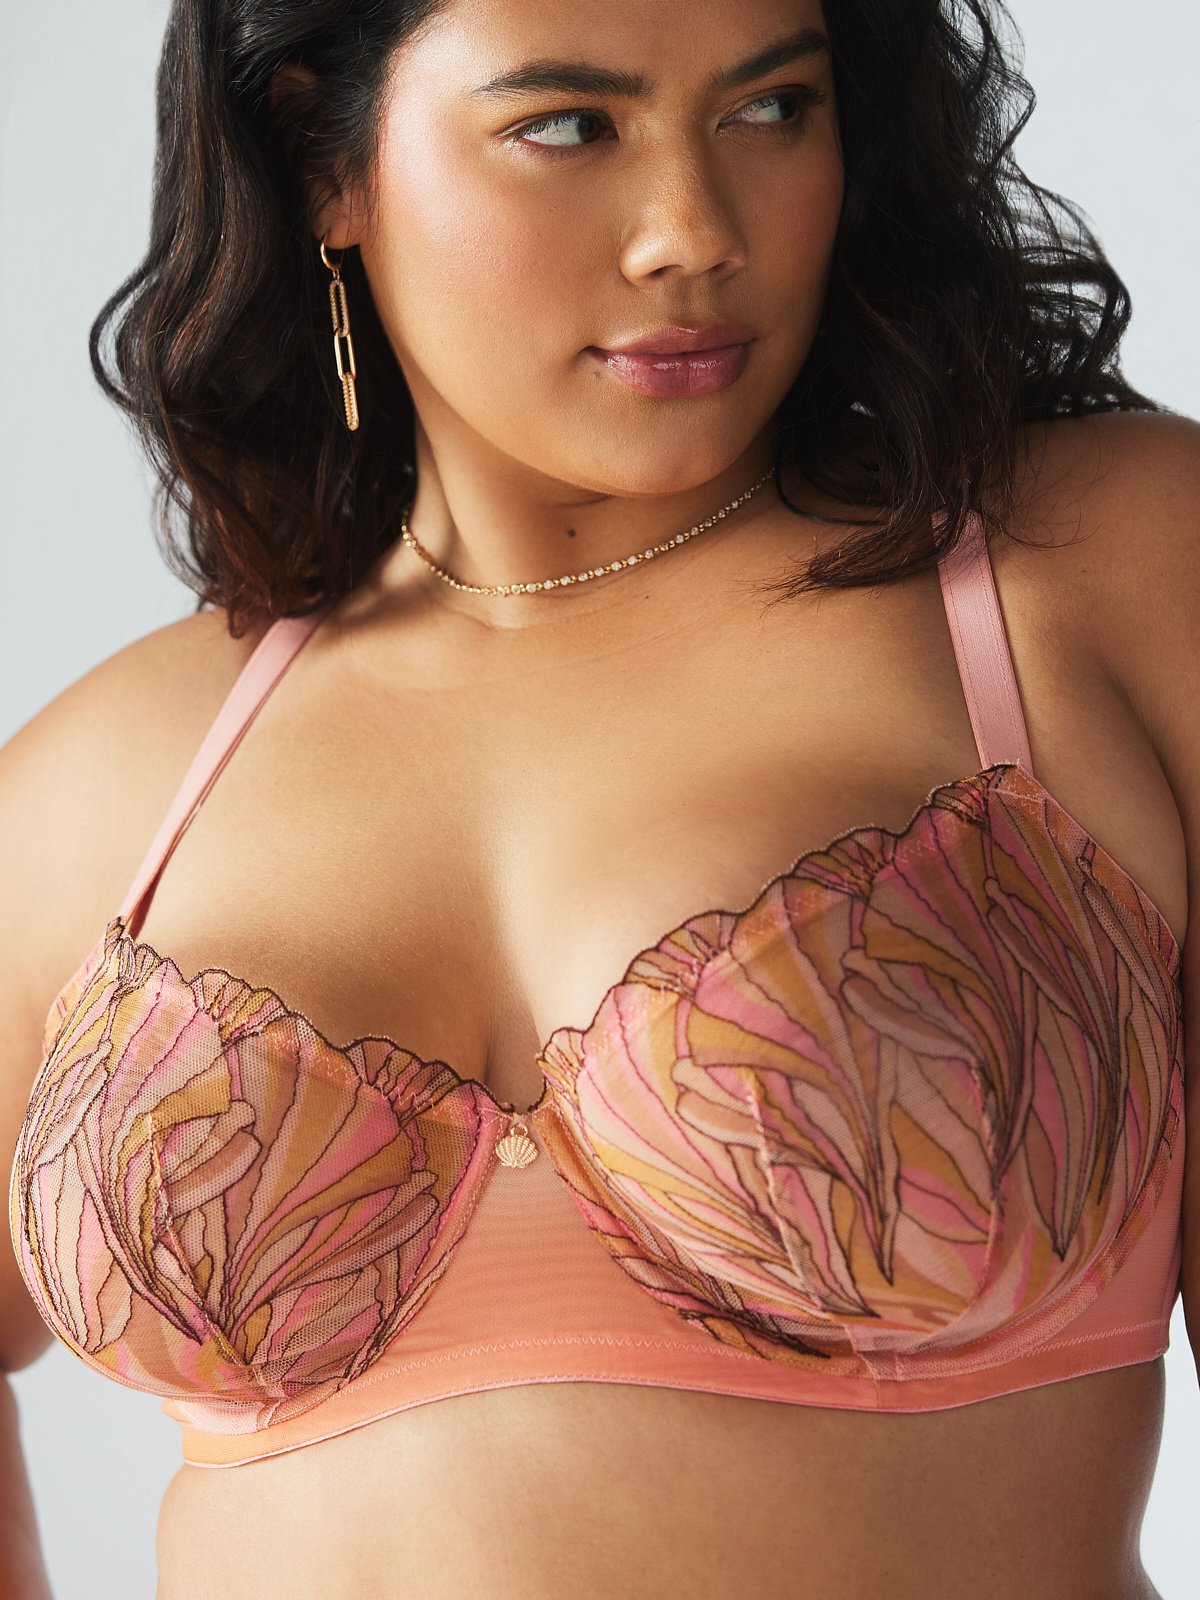  Fun & Sexy Lingerie for Women, Tiana Balconette Unlined Bra, Decorated with Embroidered Tulle